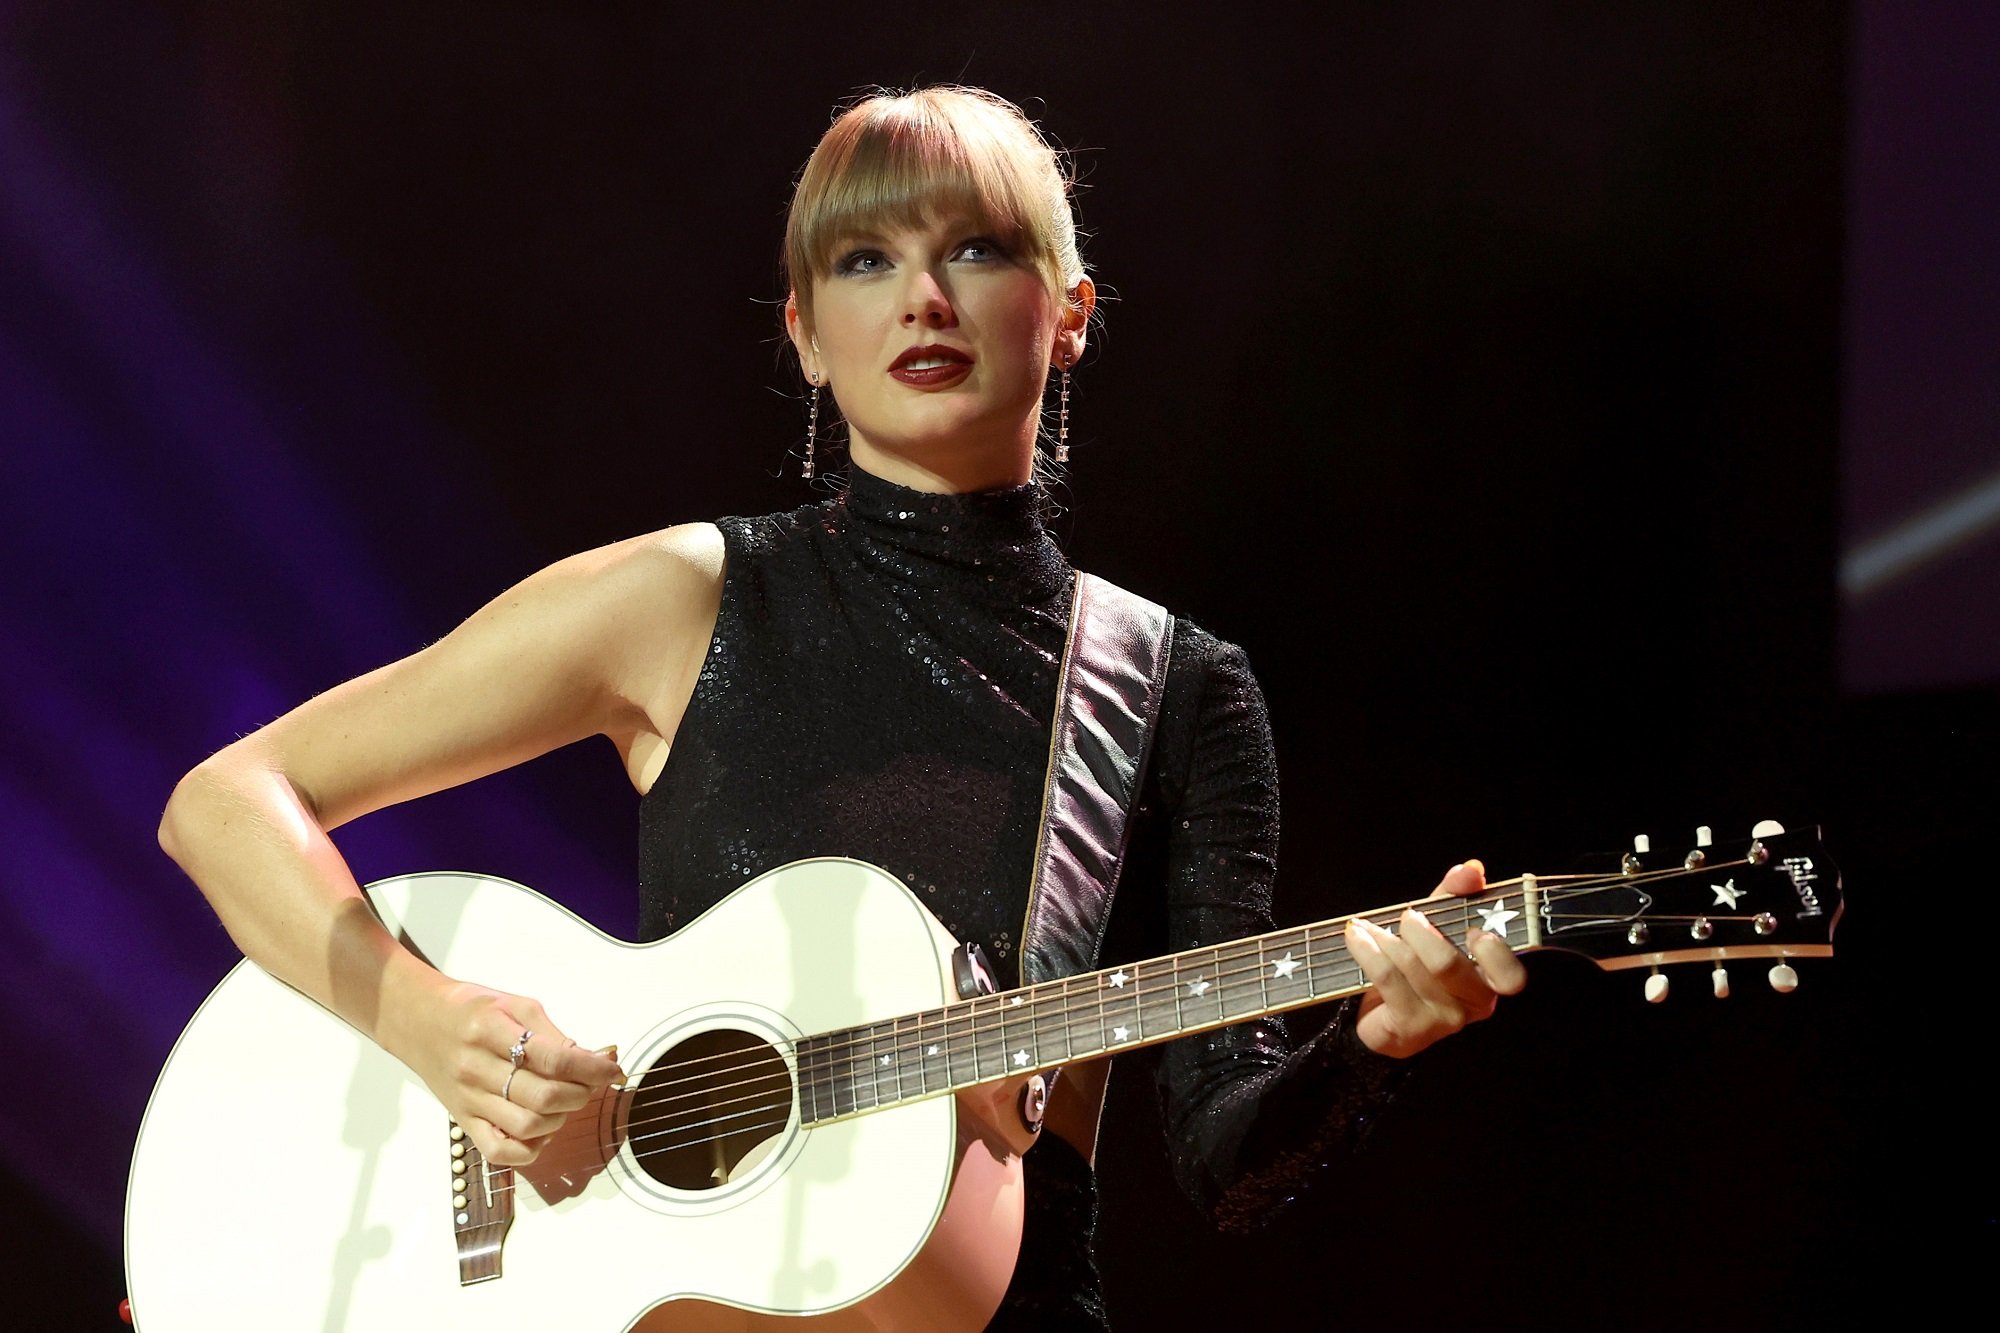 Taylor Swift plays a white acoustic guitar onstage